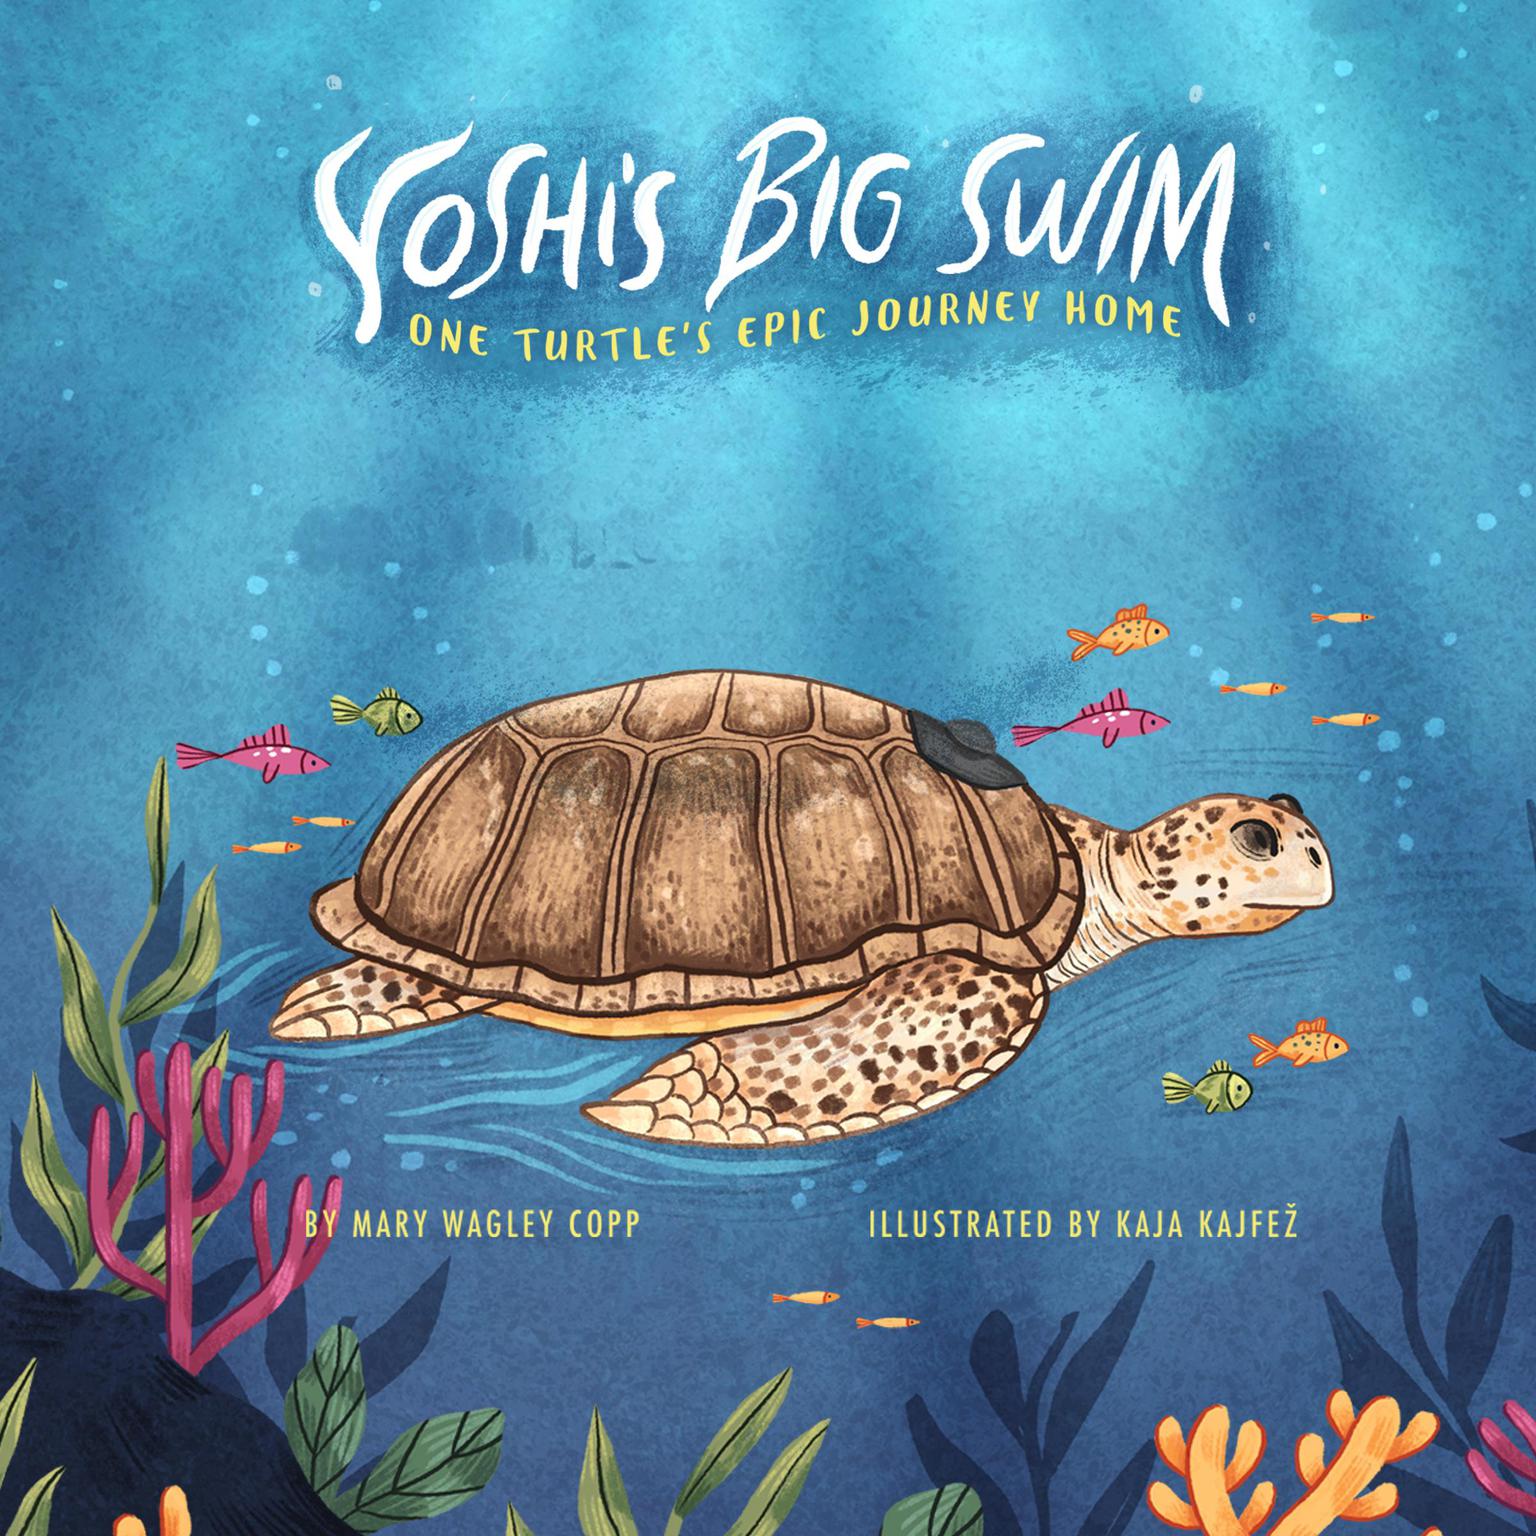 Yoshis Big Swim: One Turtles Epic Journey Home Audiobook, by Mary Wagley Copp